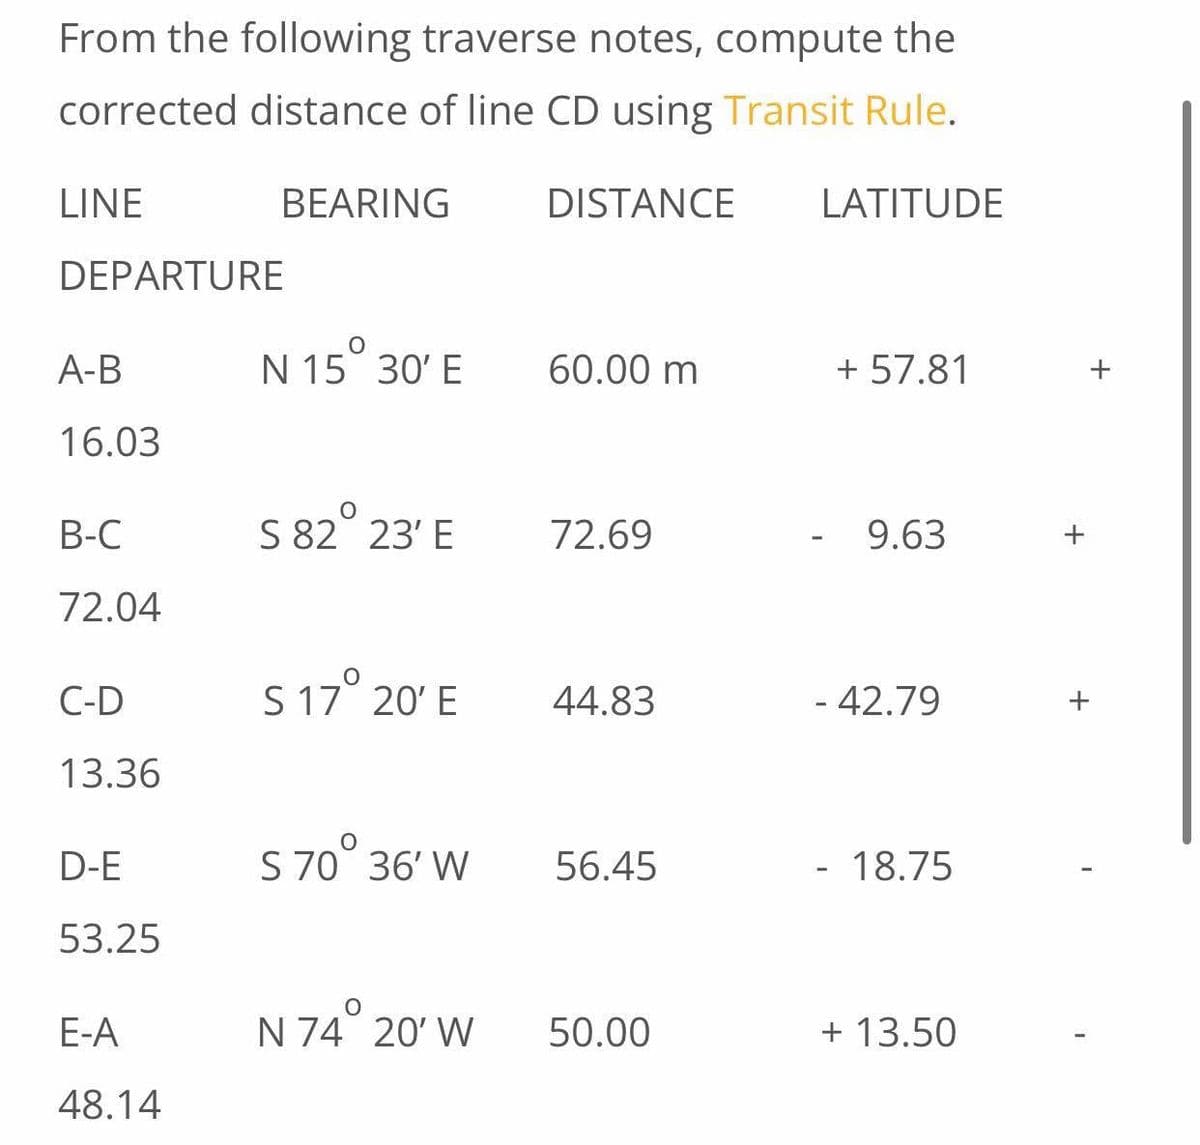 From the following traverse notes, compute the
corrected distance of line CD using Transit Rule.
LINE
BEARING
DISTANCE
LATITUDE
DEPARTURE
А-В
N 15 30' E
60.00 m
+ 57.81
16.03
В-С
S 82 23' E
72.69
9.63
72.04
S 17° 20' E
- 42.79
C-D
44.83
13.36
D-E
S 70 36' W
56.45
18.75
53.25
E-A
N 74 20' W
50.00
+ 13.50
48.14
